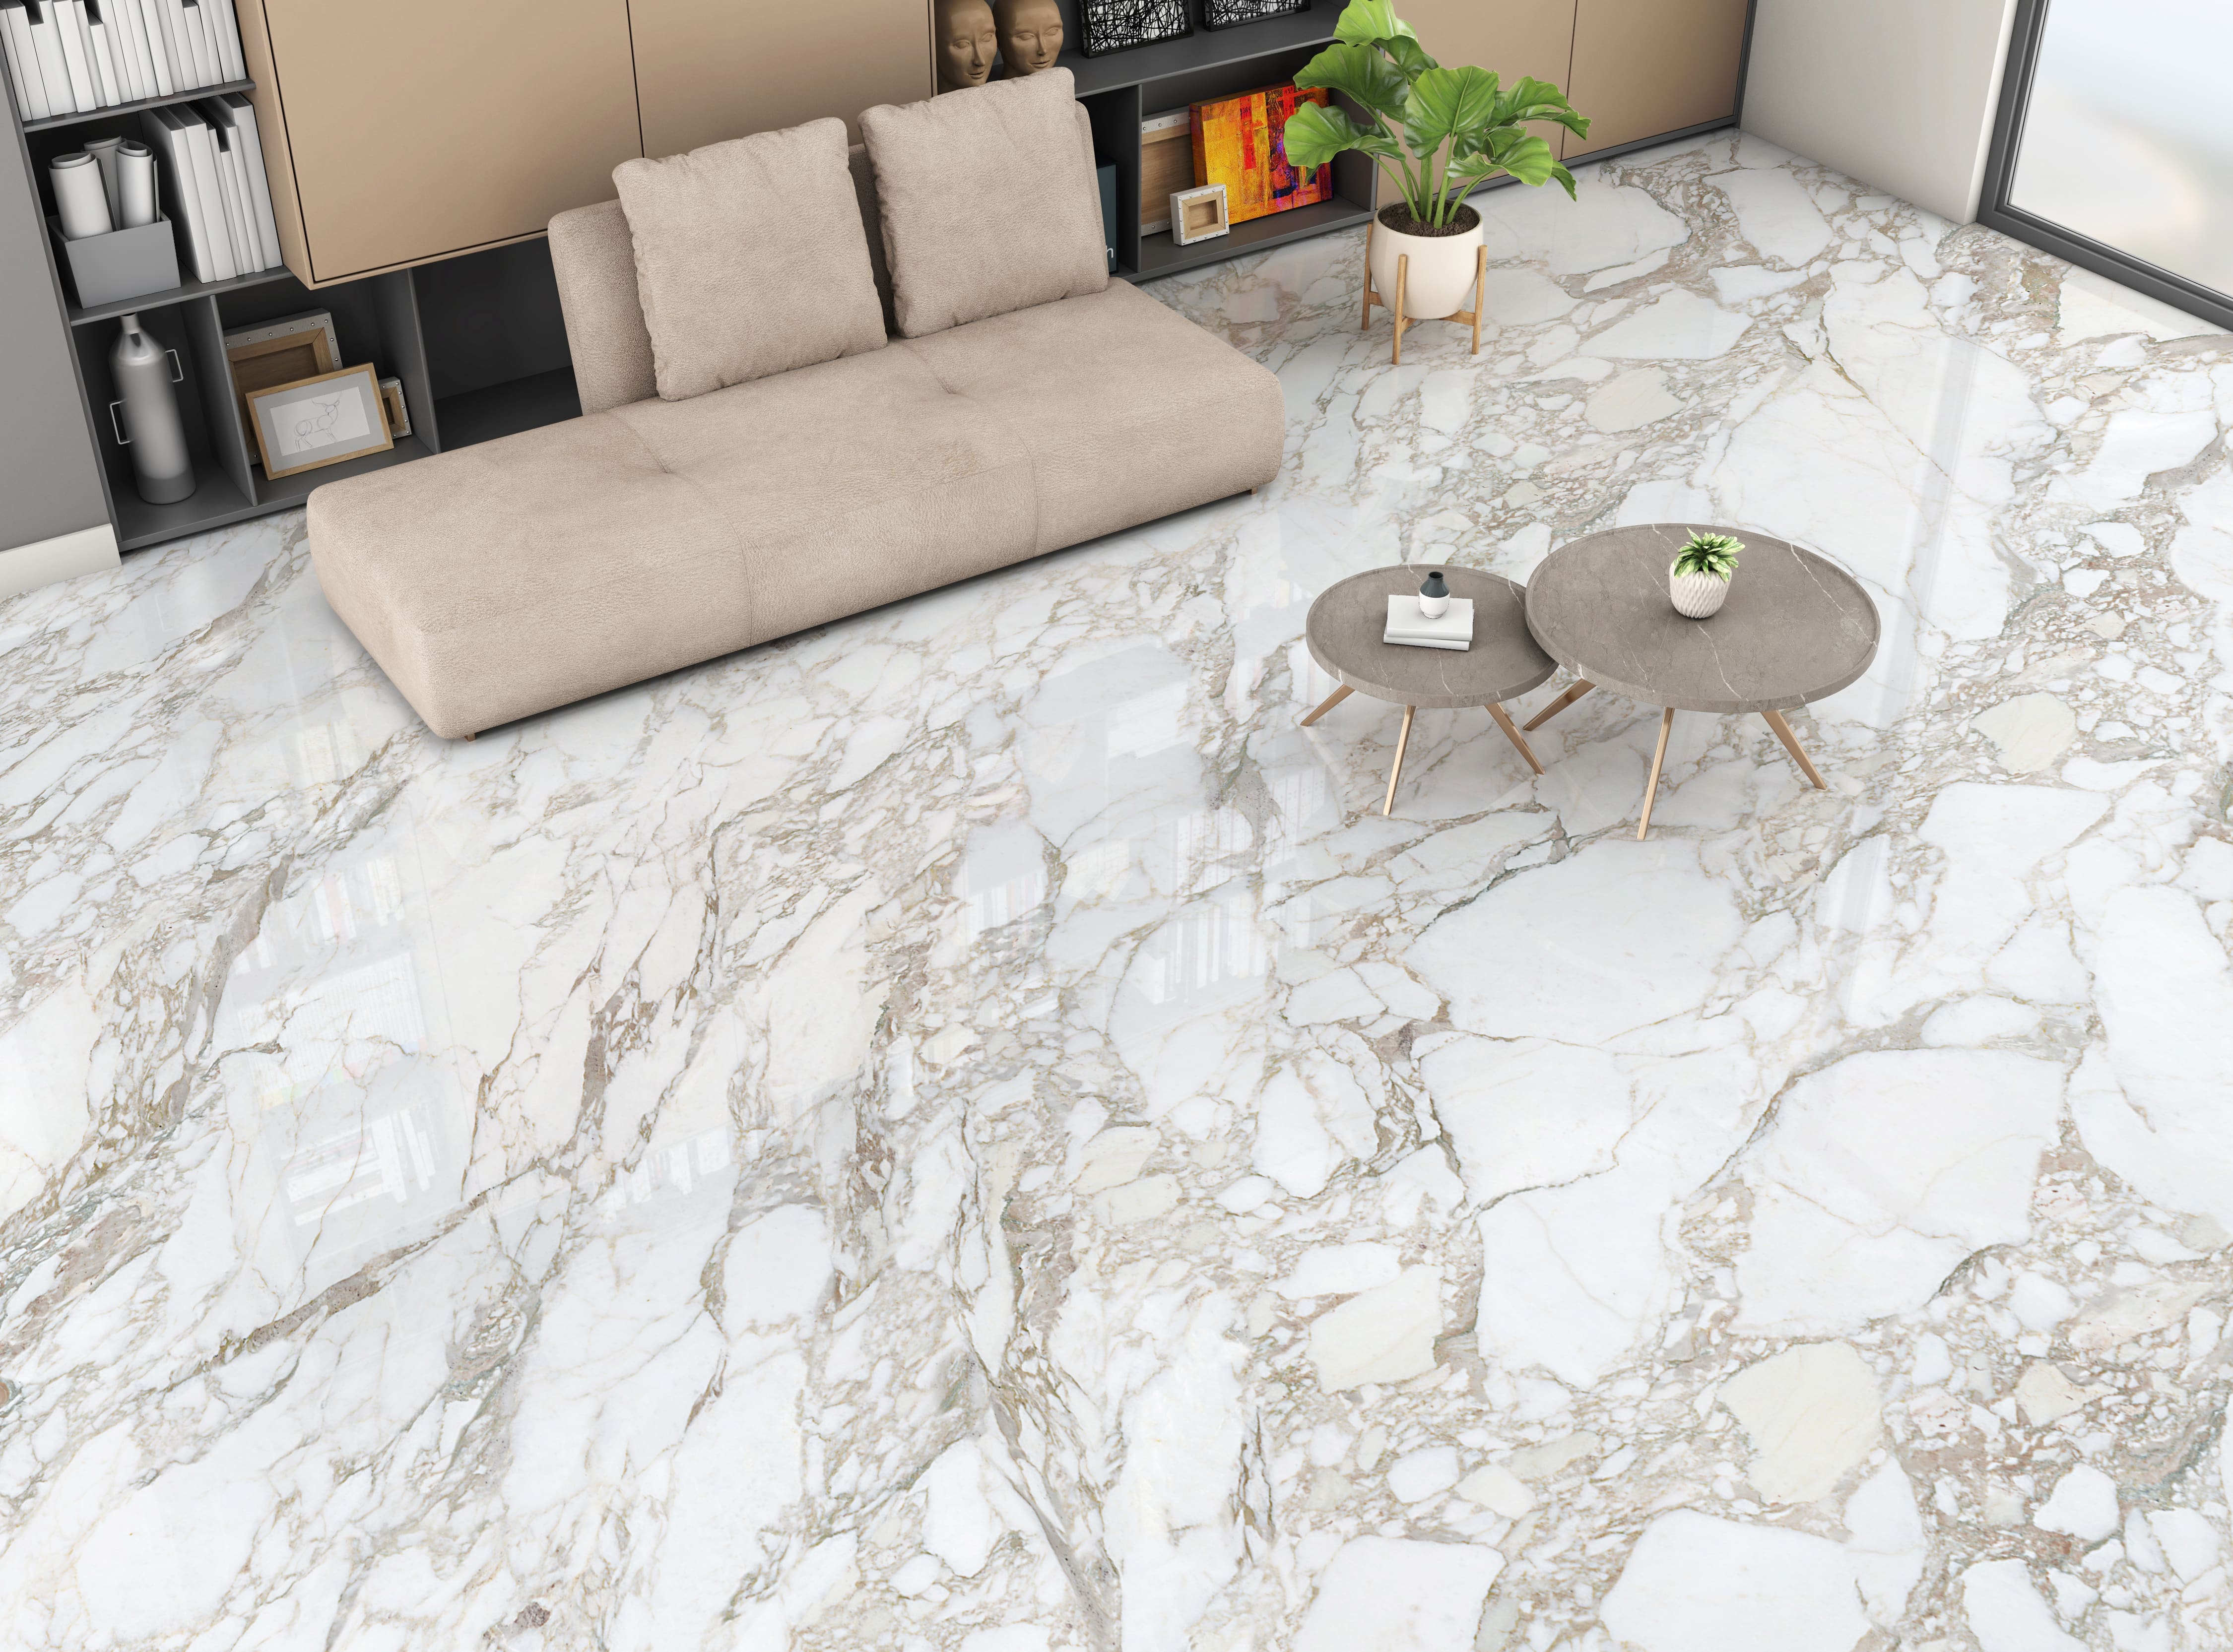 GLAZE Granite & Marble, UAE’s largest marble importer announces the launch of its new Large-Format Porcelain Brand - KOZO